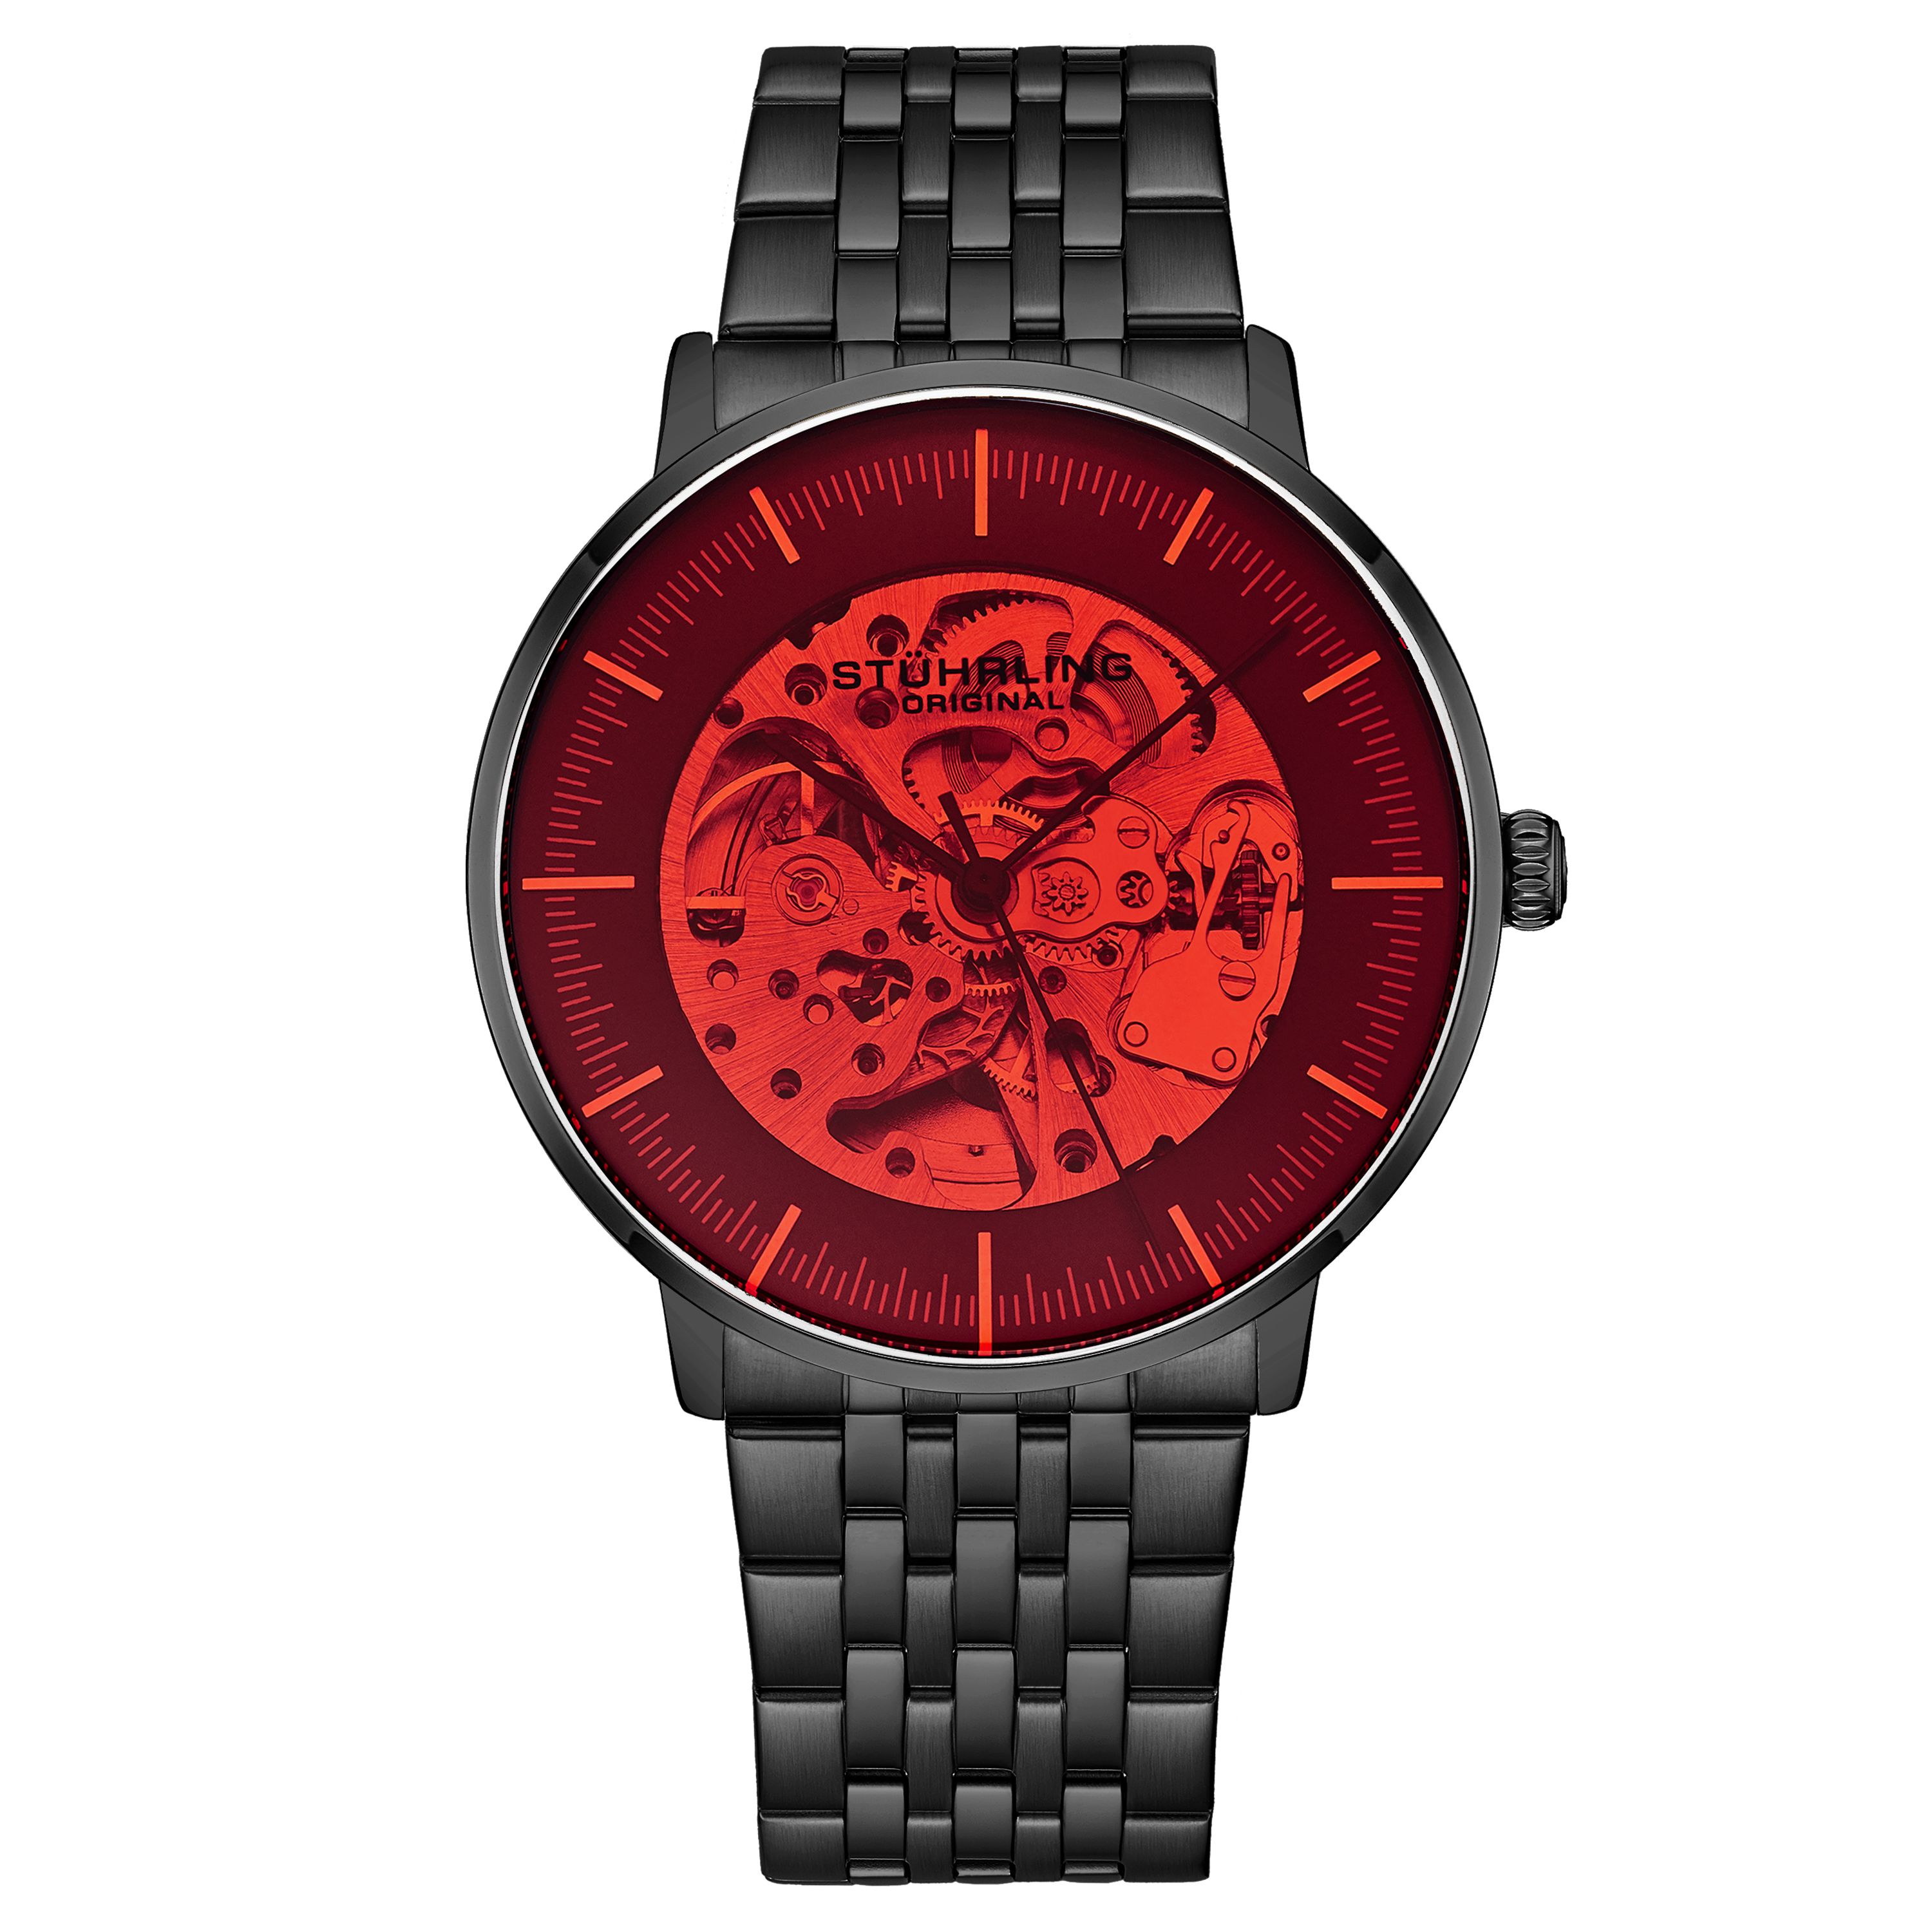 Men's Automatic Black Case, Black Bezel Red Tinted Glass, Grey Dial Ring with Silver Center With Gold Toned Colored Accent, Black Hands and Markers, Black Link Bracelet Watch